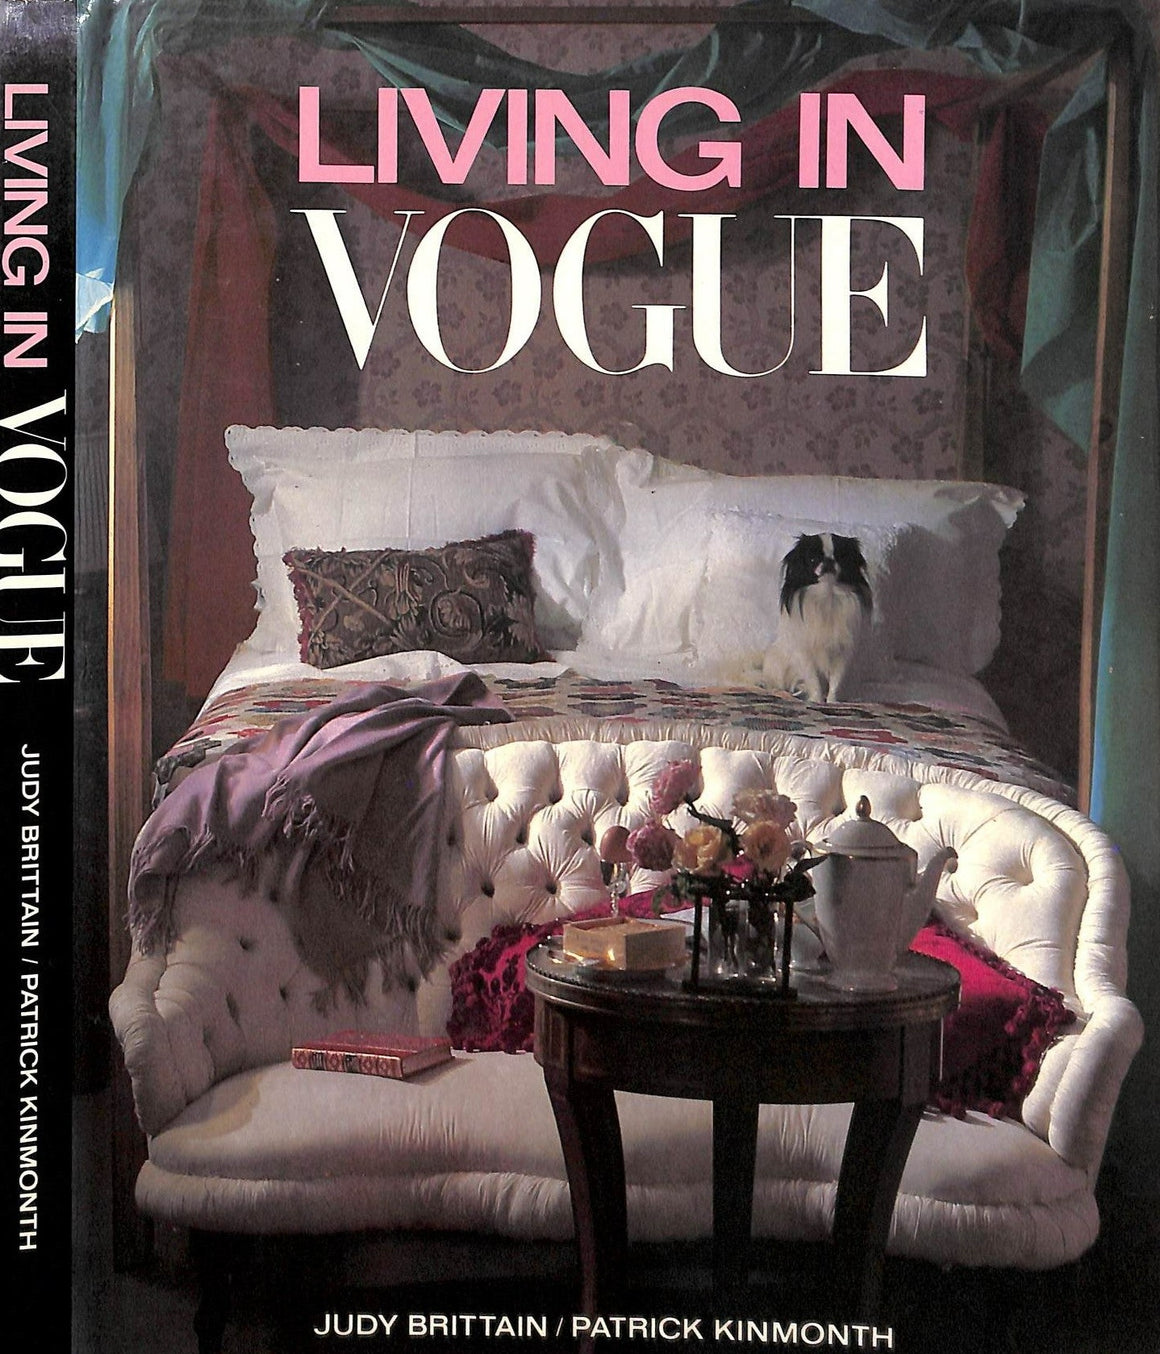 "Living In Vogue" 1984 BRITTAIN, Judy and KINMONTH Patrick